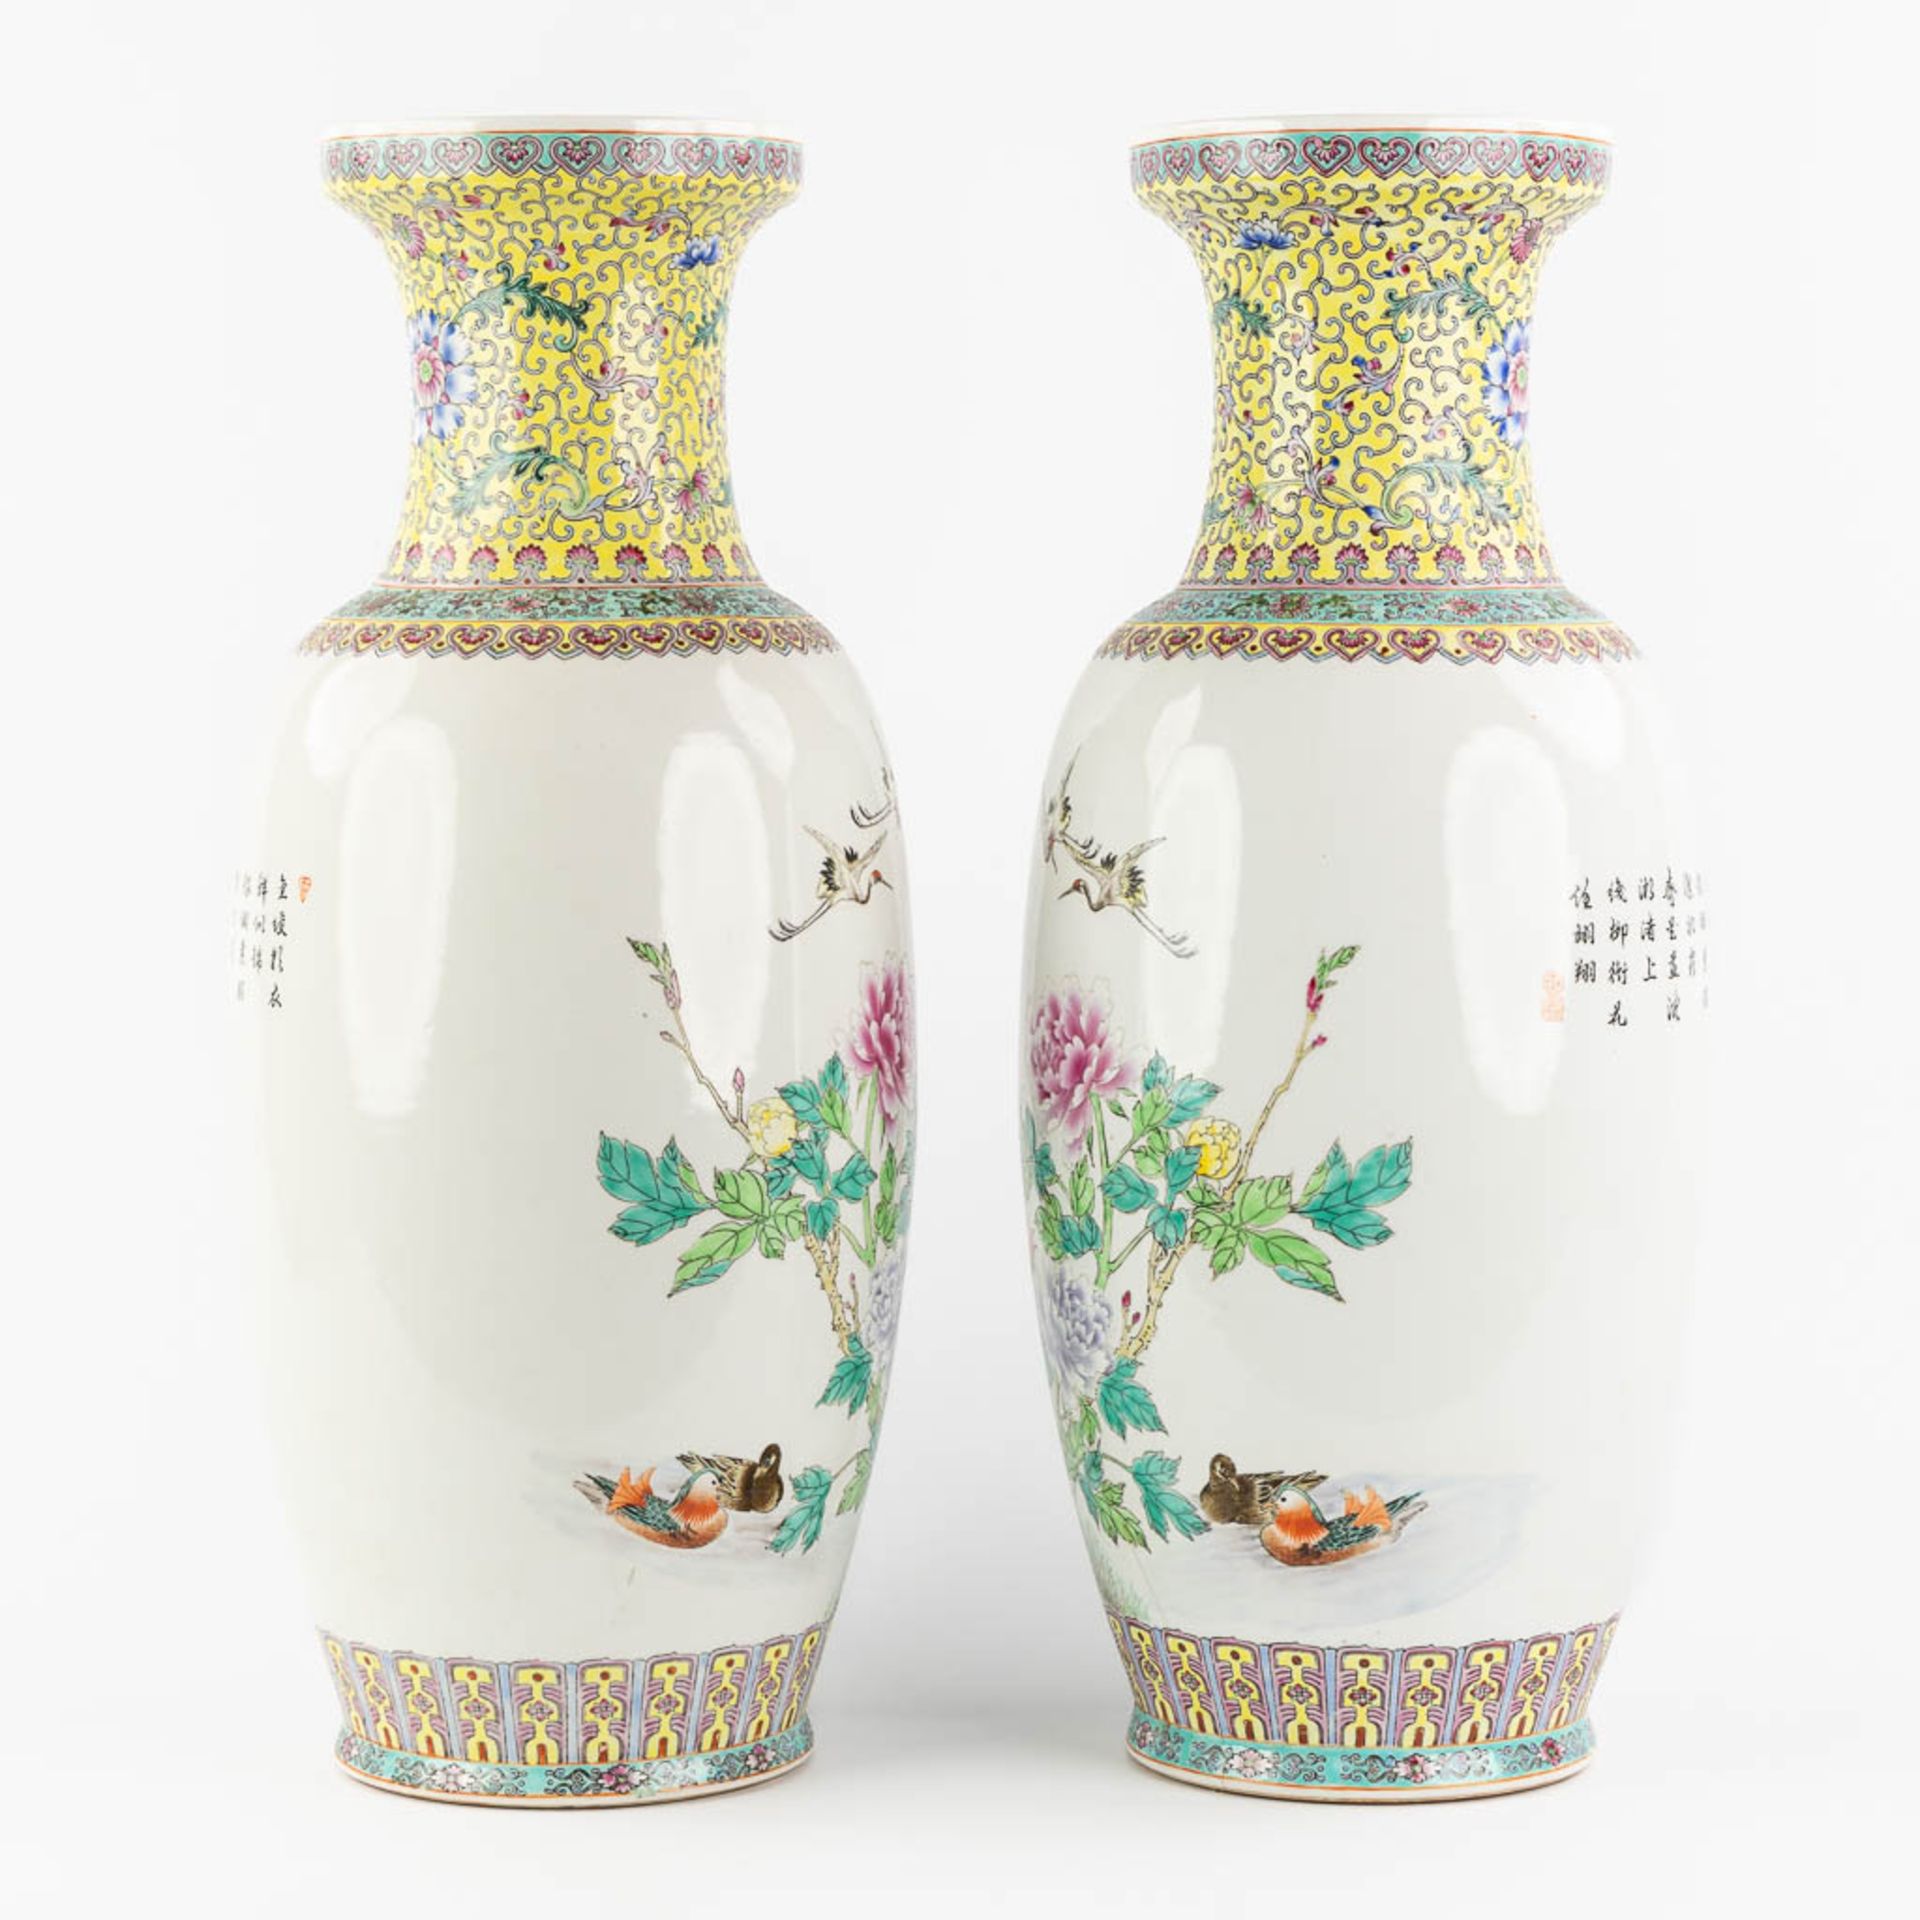 A decorative pair of Chinese vases with a Phoenix decor, 20th C. (H:62 x D:26 cm) - Image 4 of 16